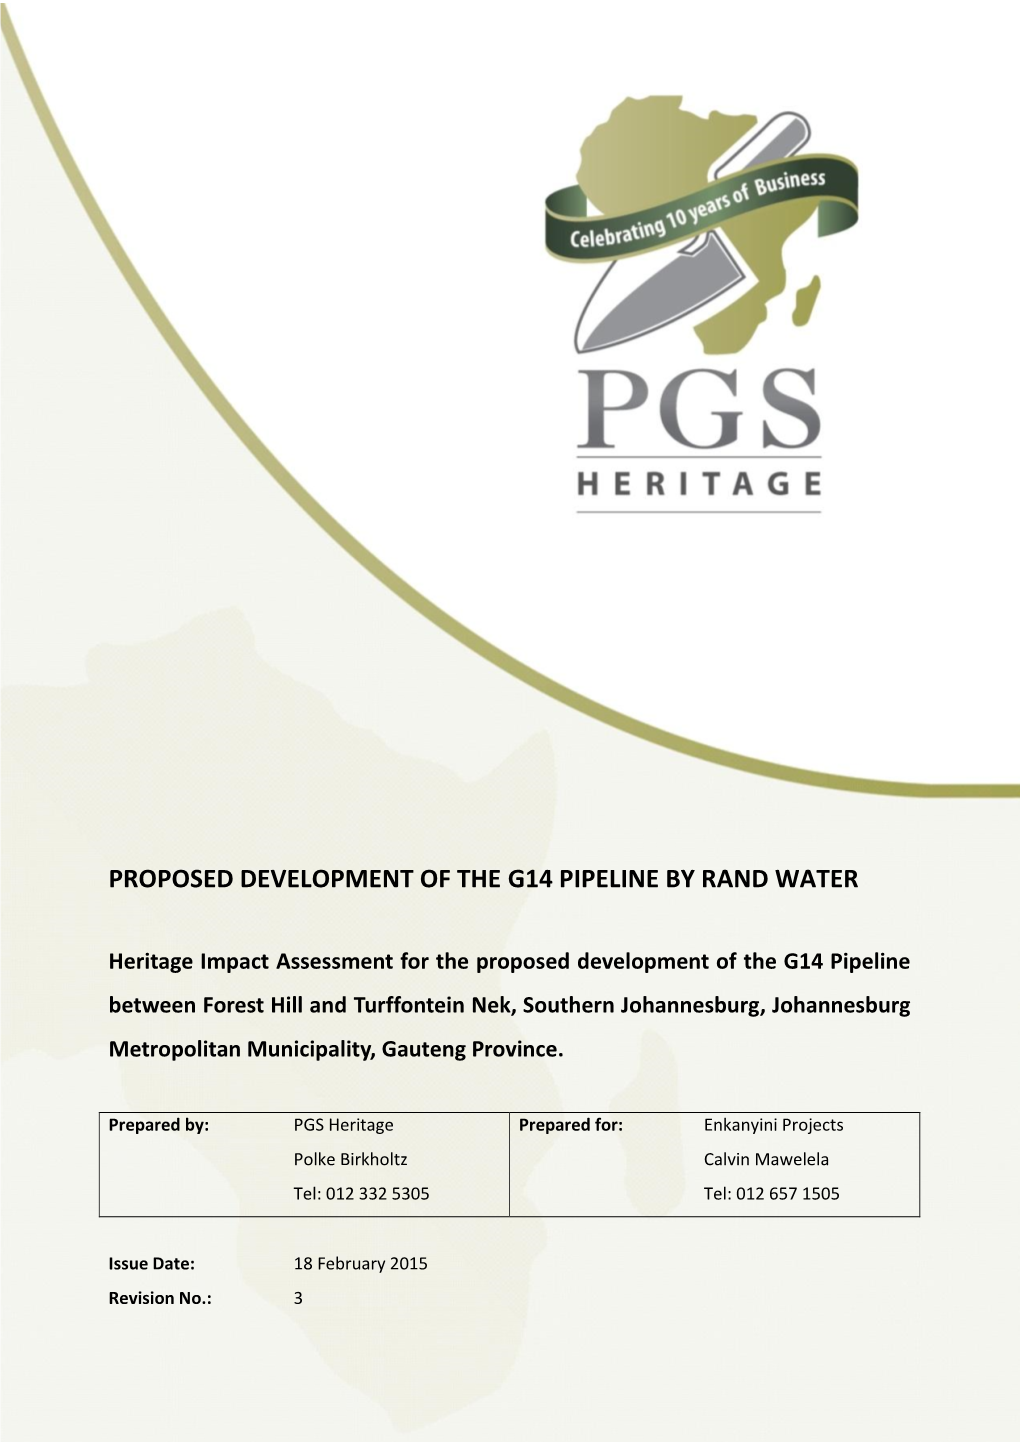 Proposed Development of the G14 Pipeline by Rand Water